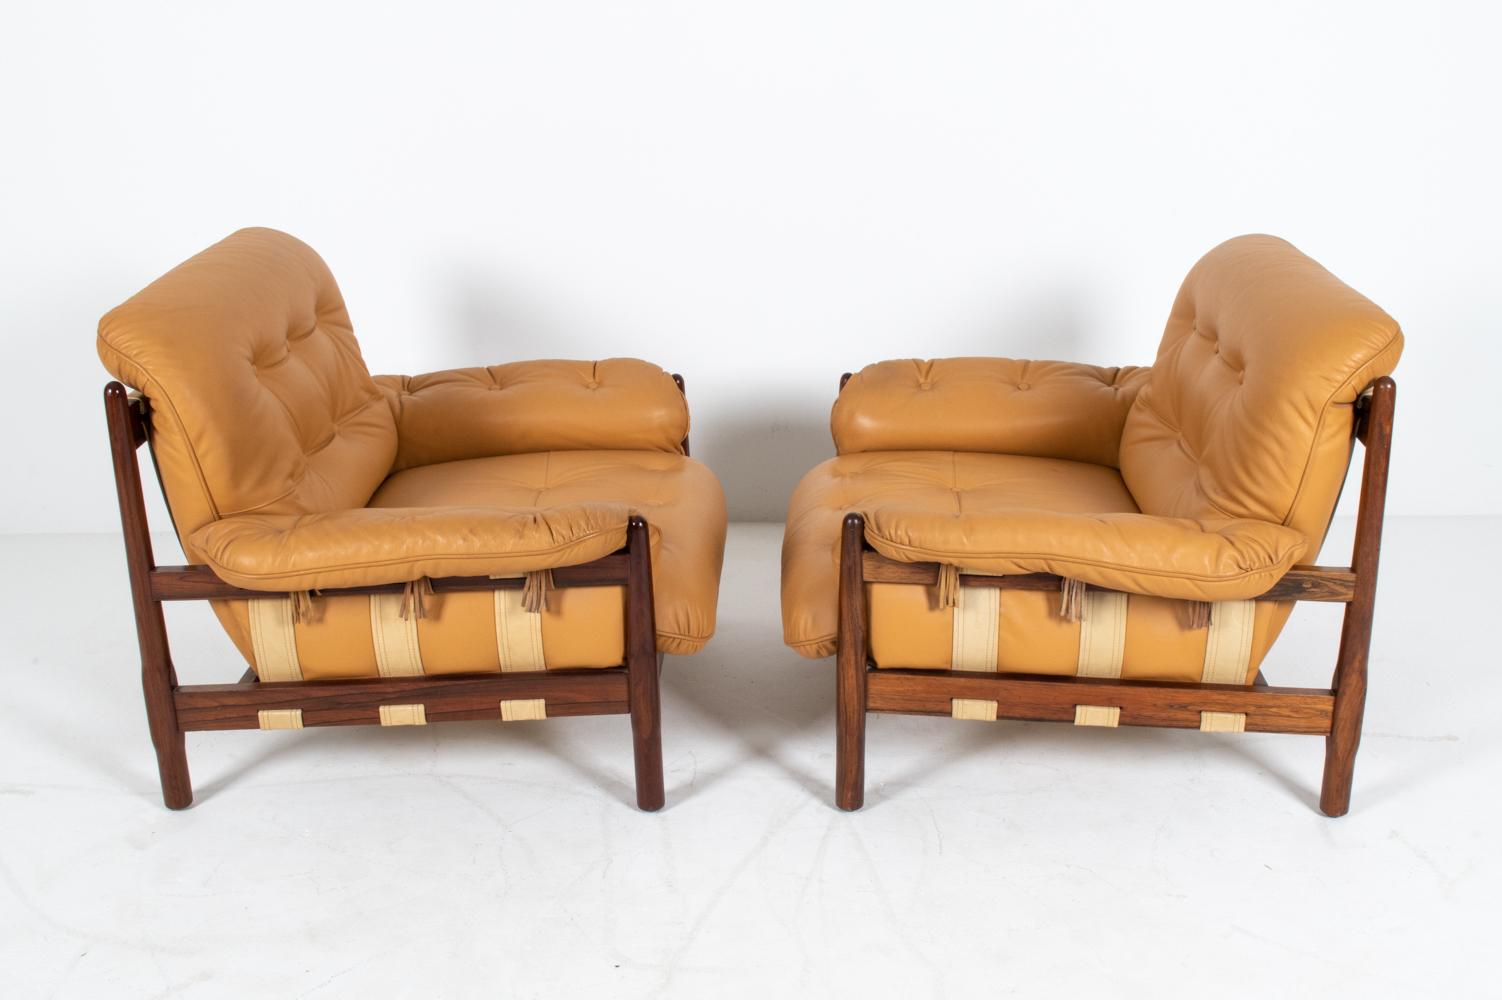 Pair of Brazilian Modernist Rosewood & Leather Easy Chairs, circa 1970s For Sale 8